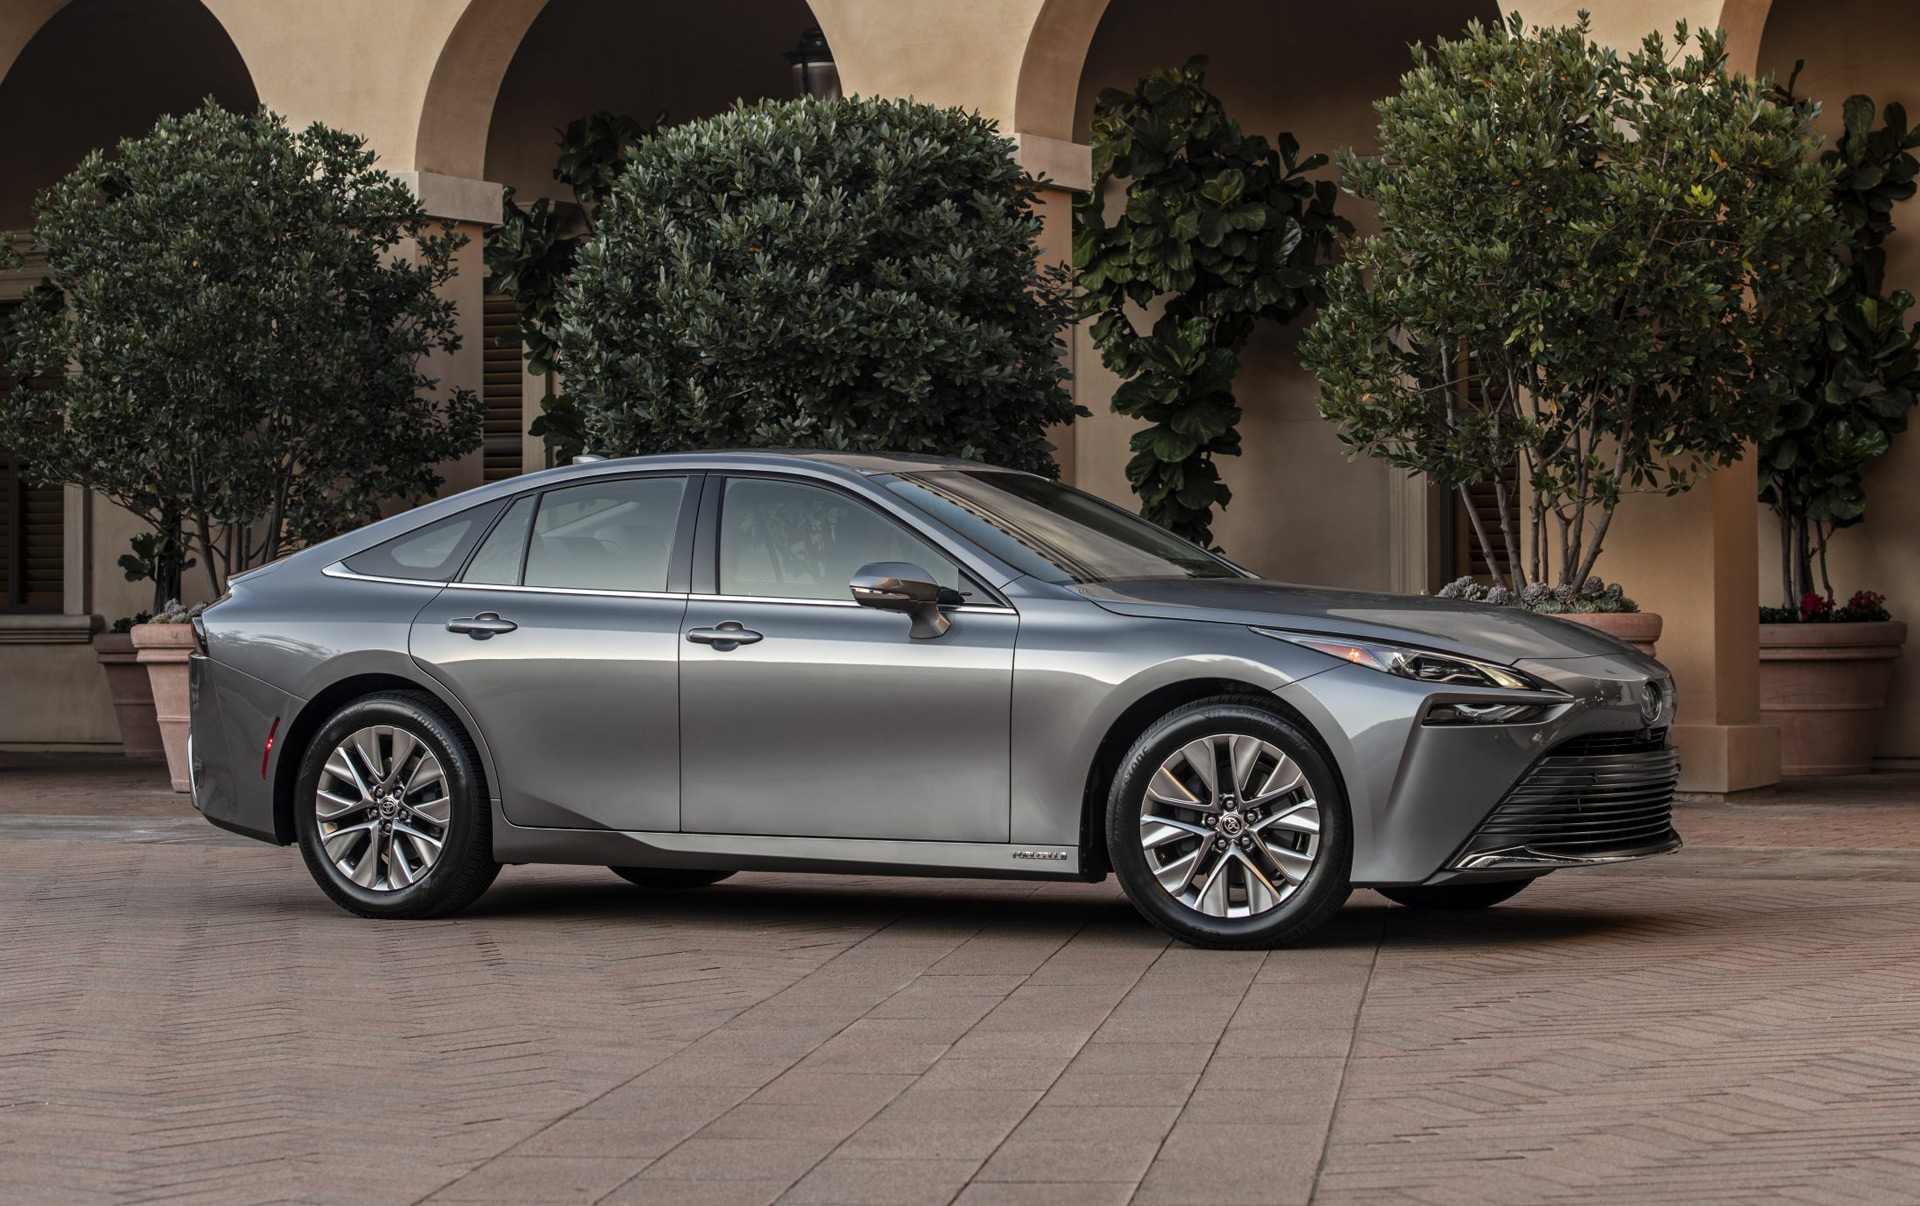 Preview 2021 Toyota Mirai Brings Sexier Look Lower Price For Fuel Cell Sedan